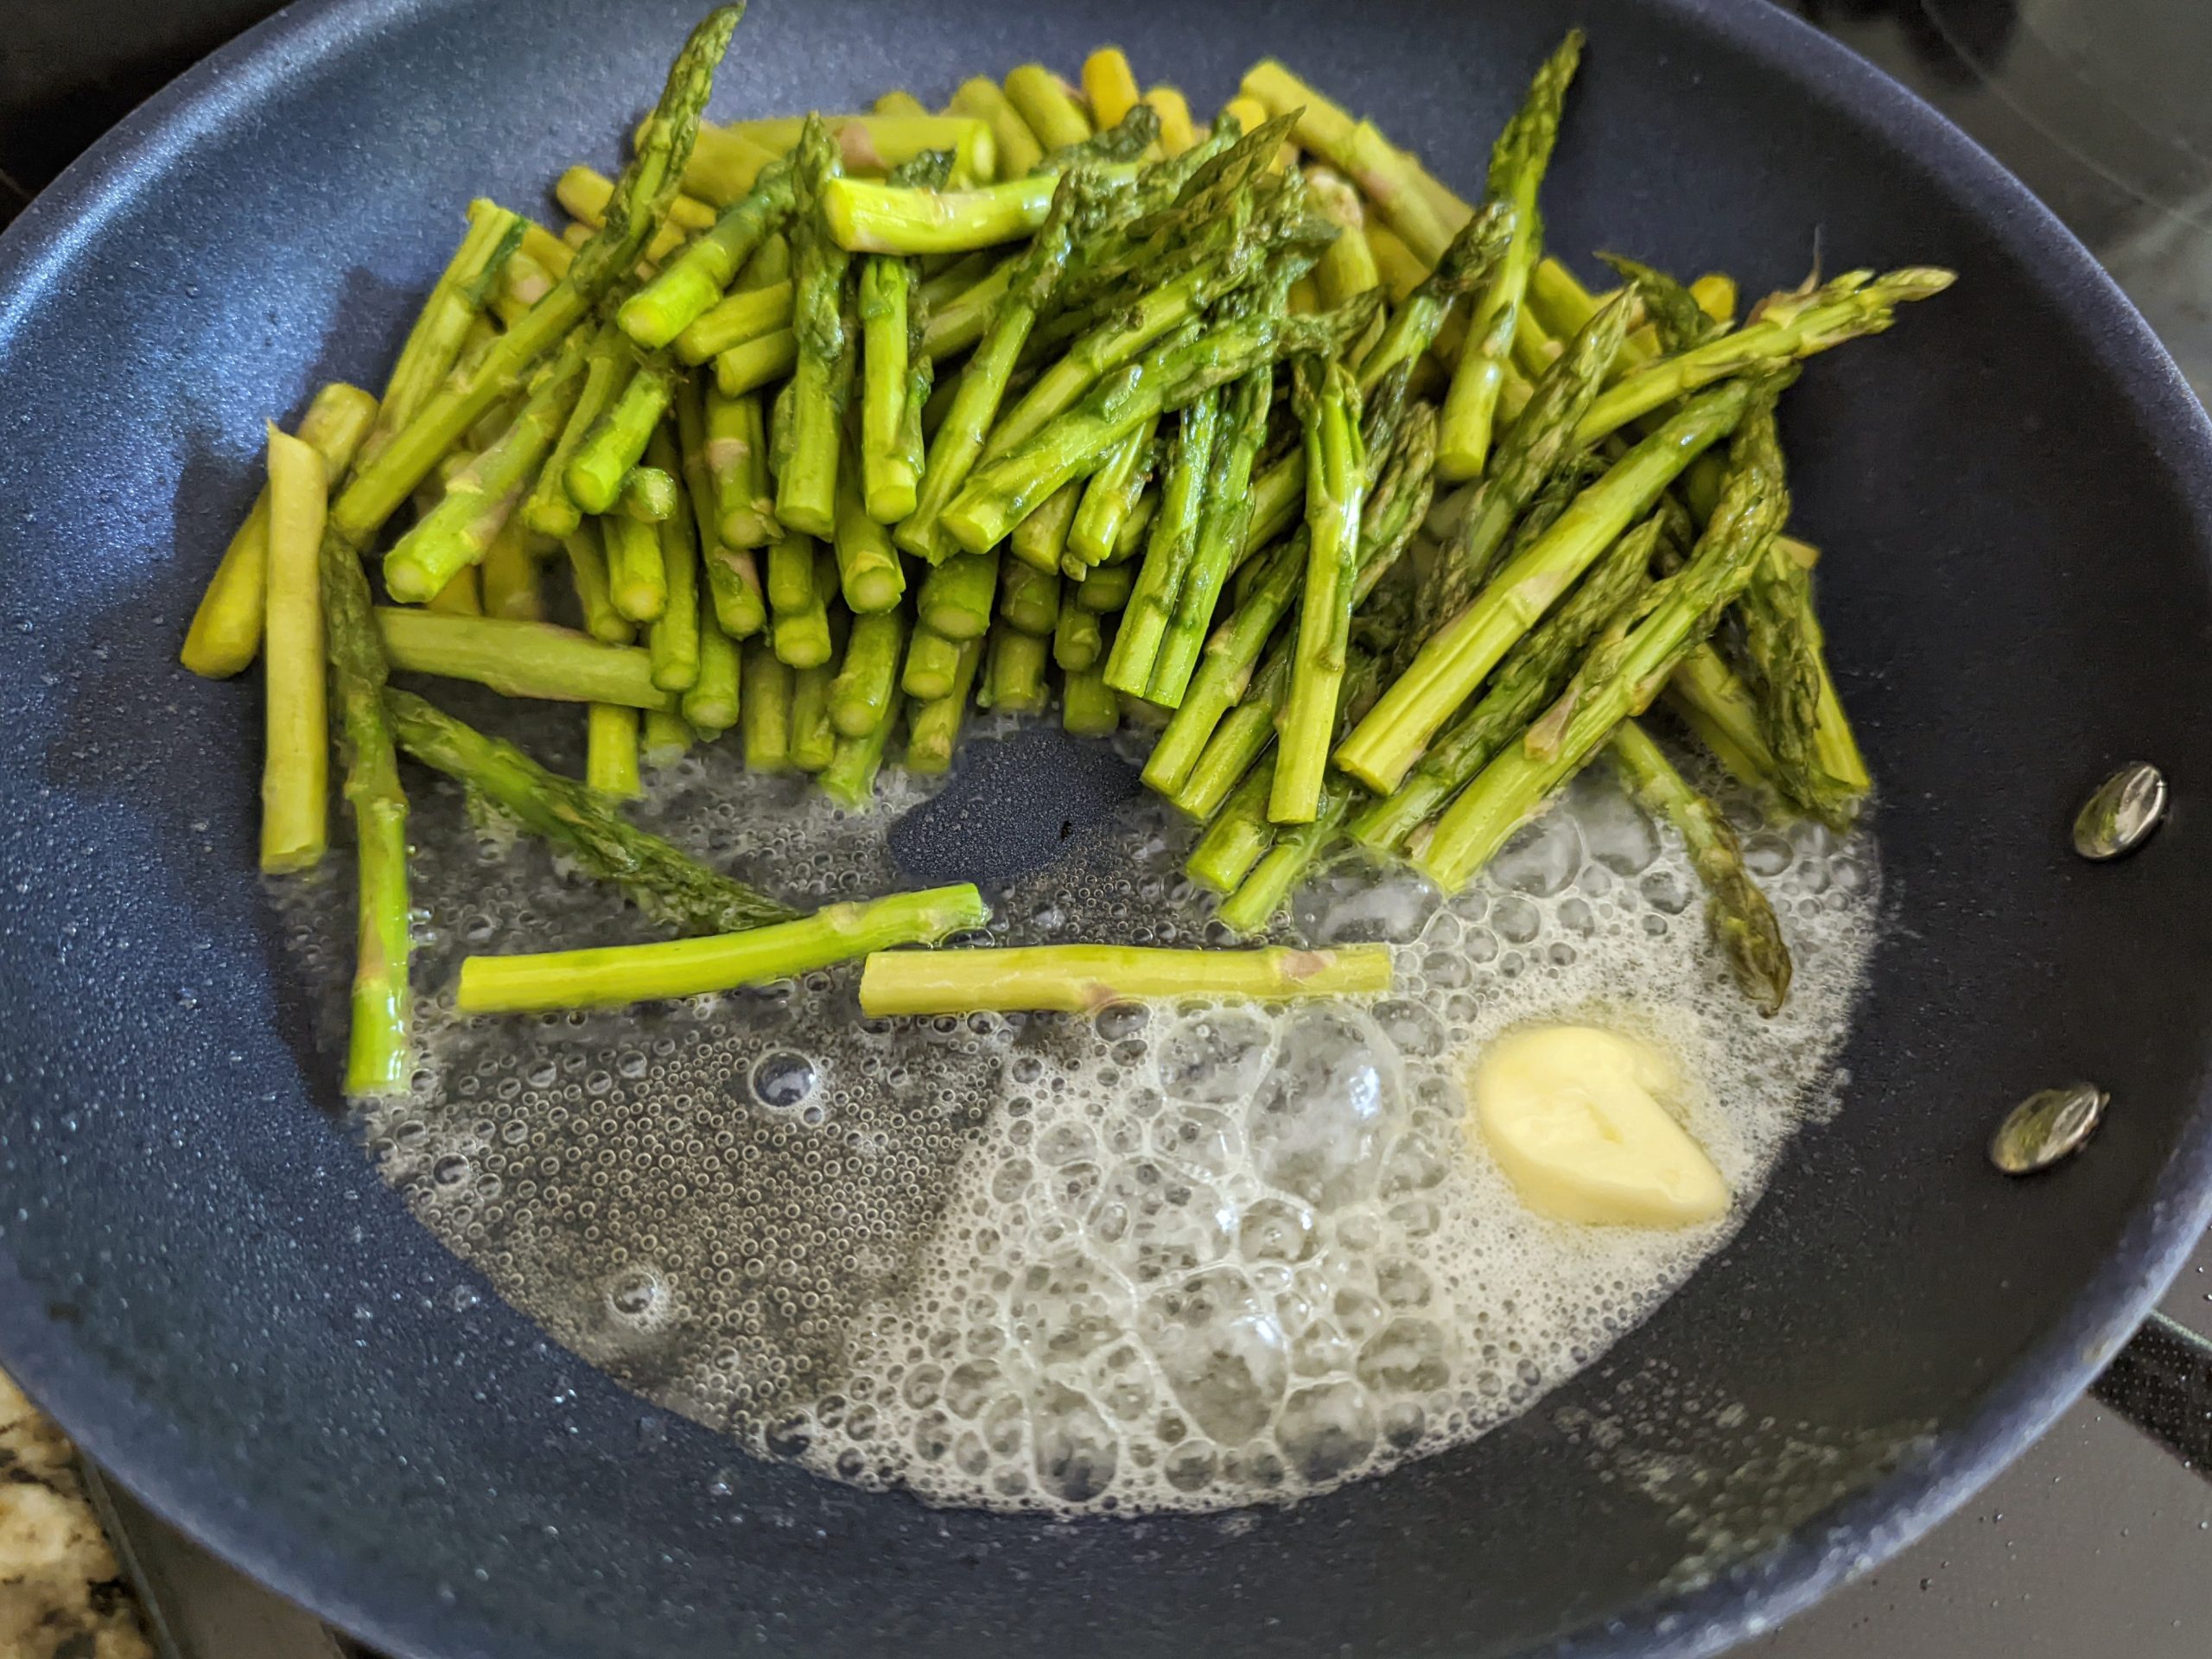 Add butter and asparagus to the pan with oil and saute.